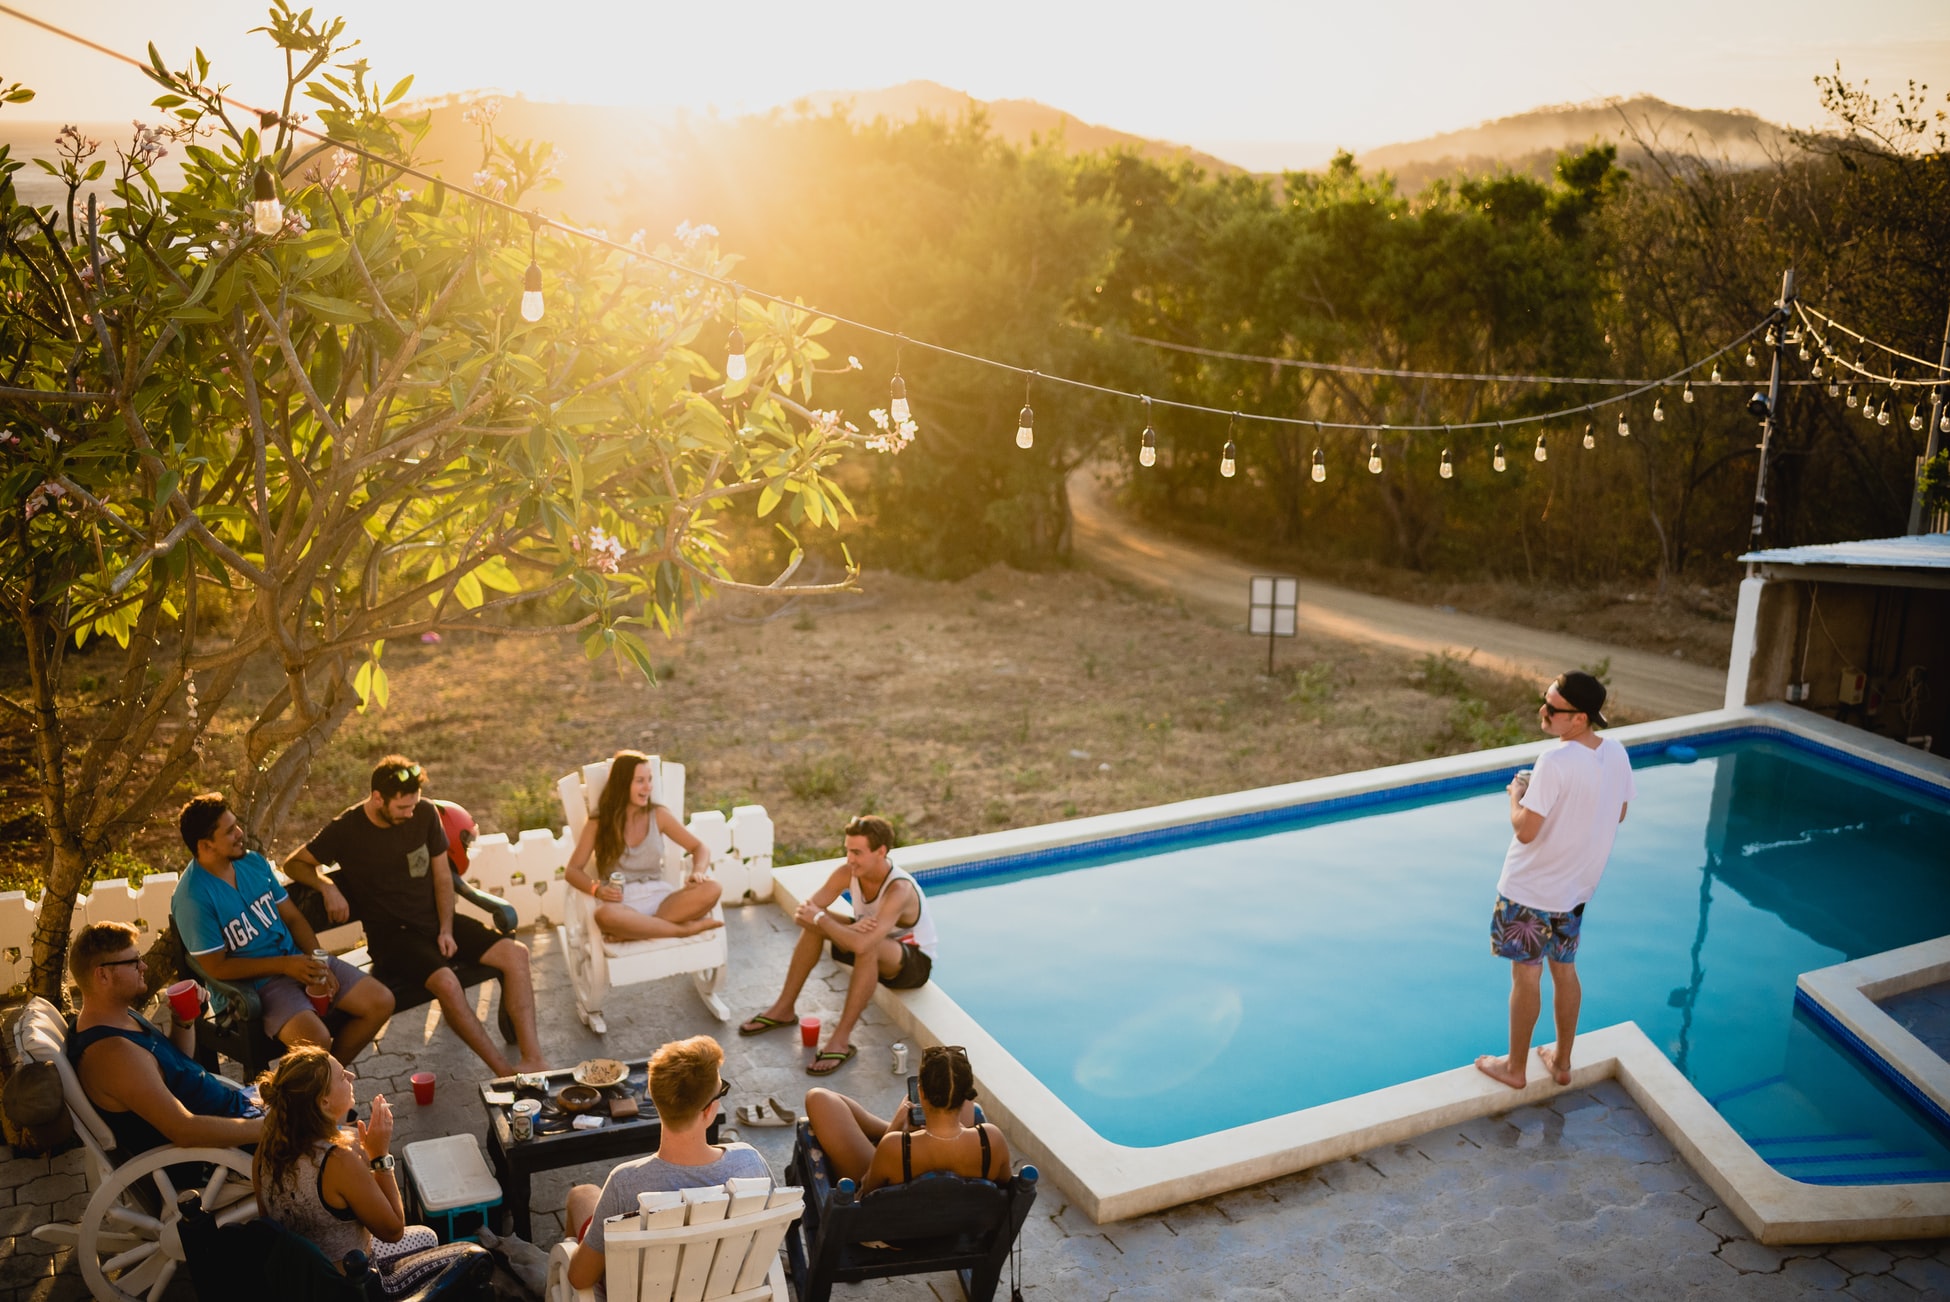 airbnb - How To Make it Through Wedding Season Without Going Broke